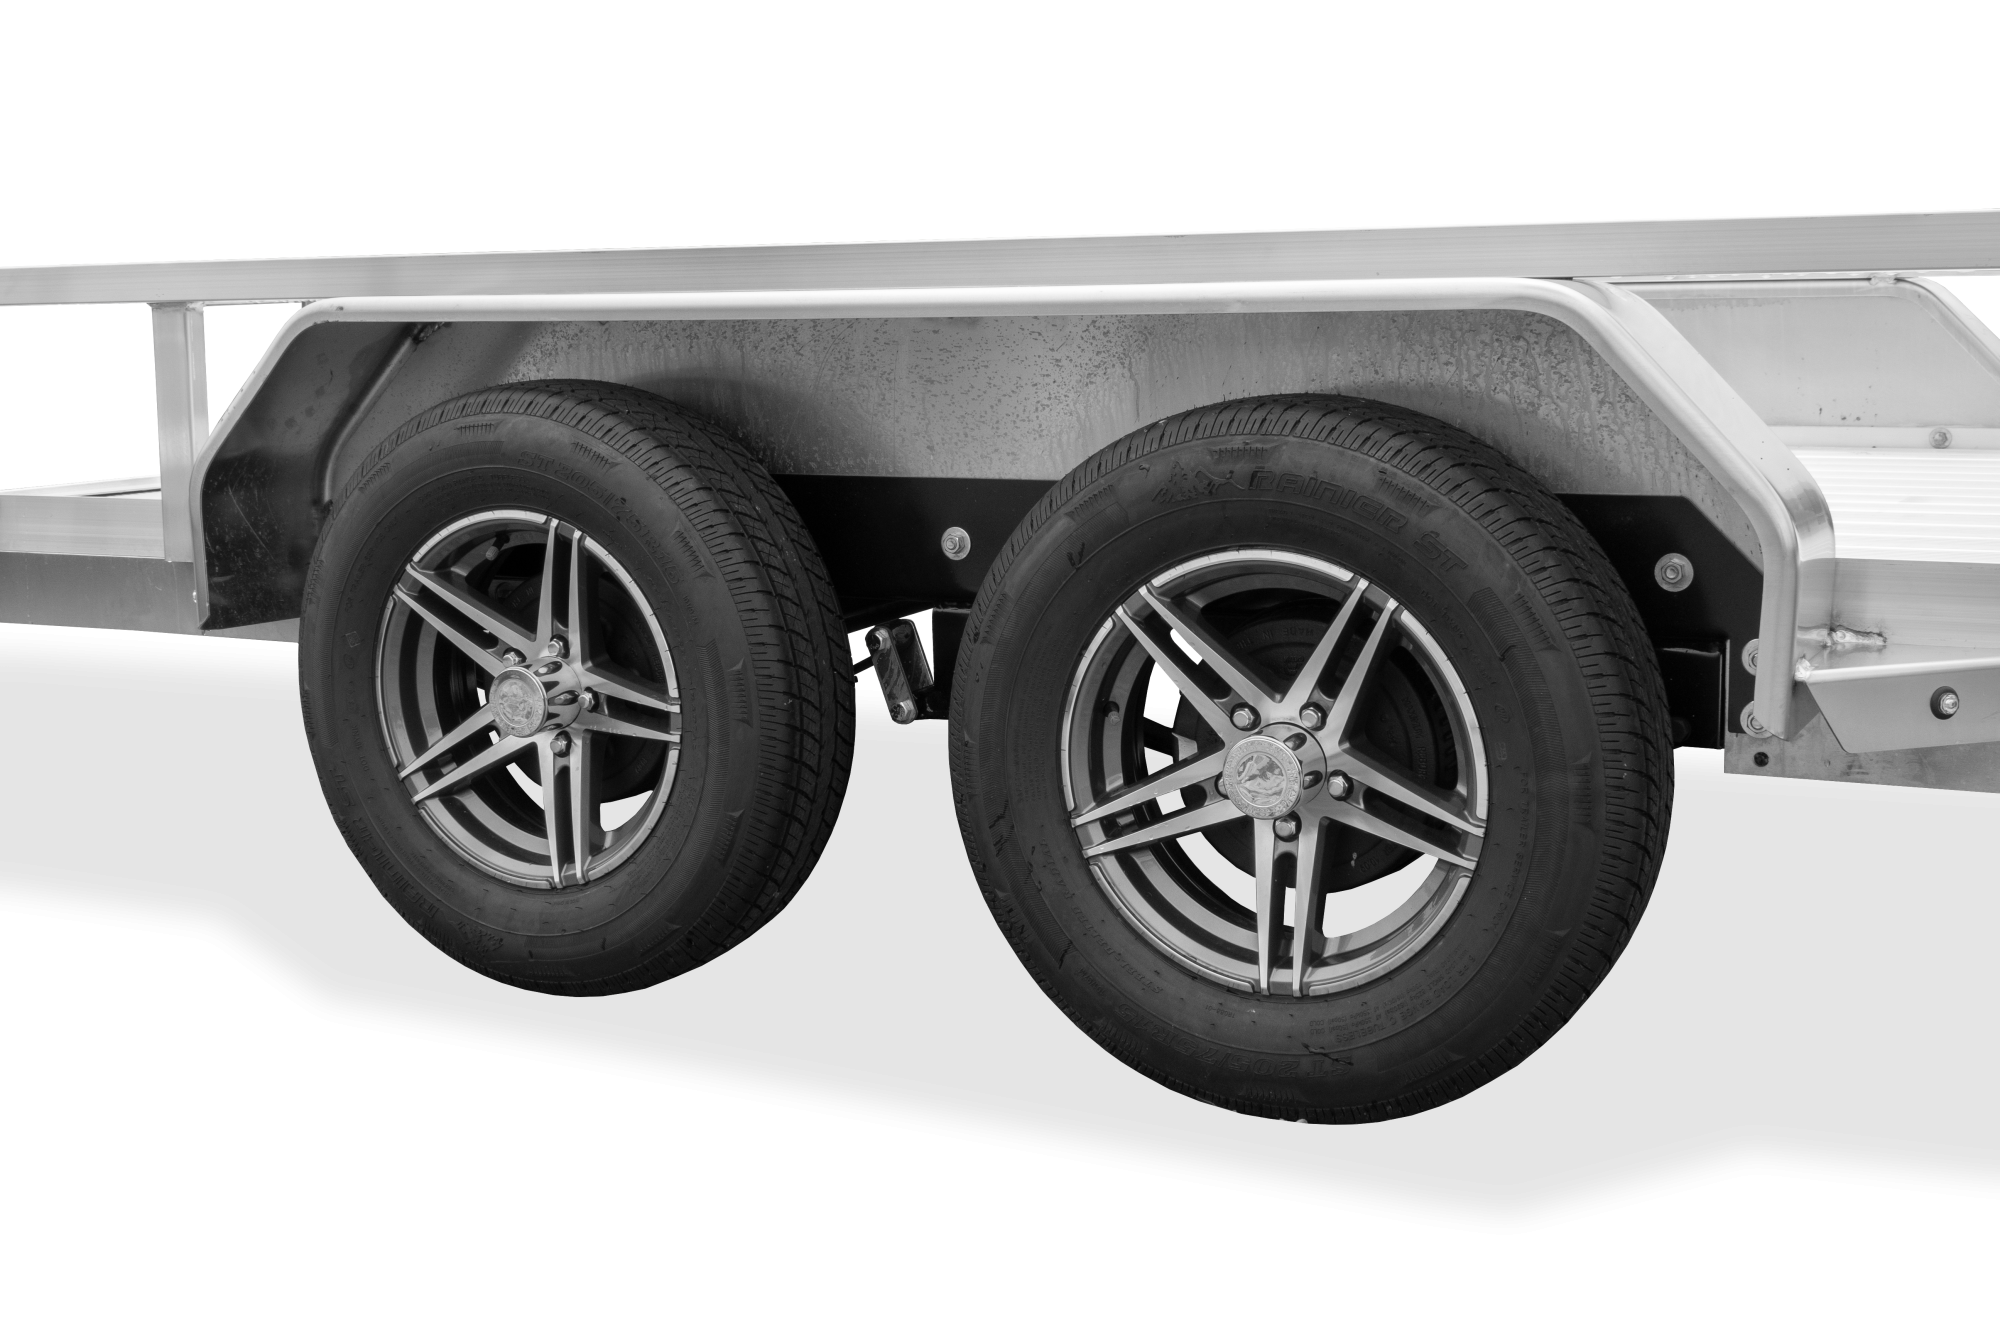 Sure-Trac | Aluminum Tube Top Utility | Image | Side view, straight, Tandem Axle Aluminum Tube Top Utility, close-up of Tires